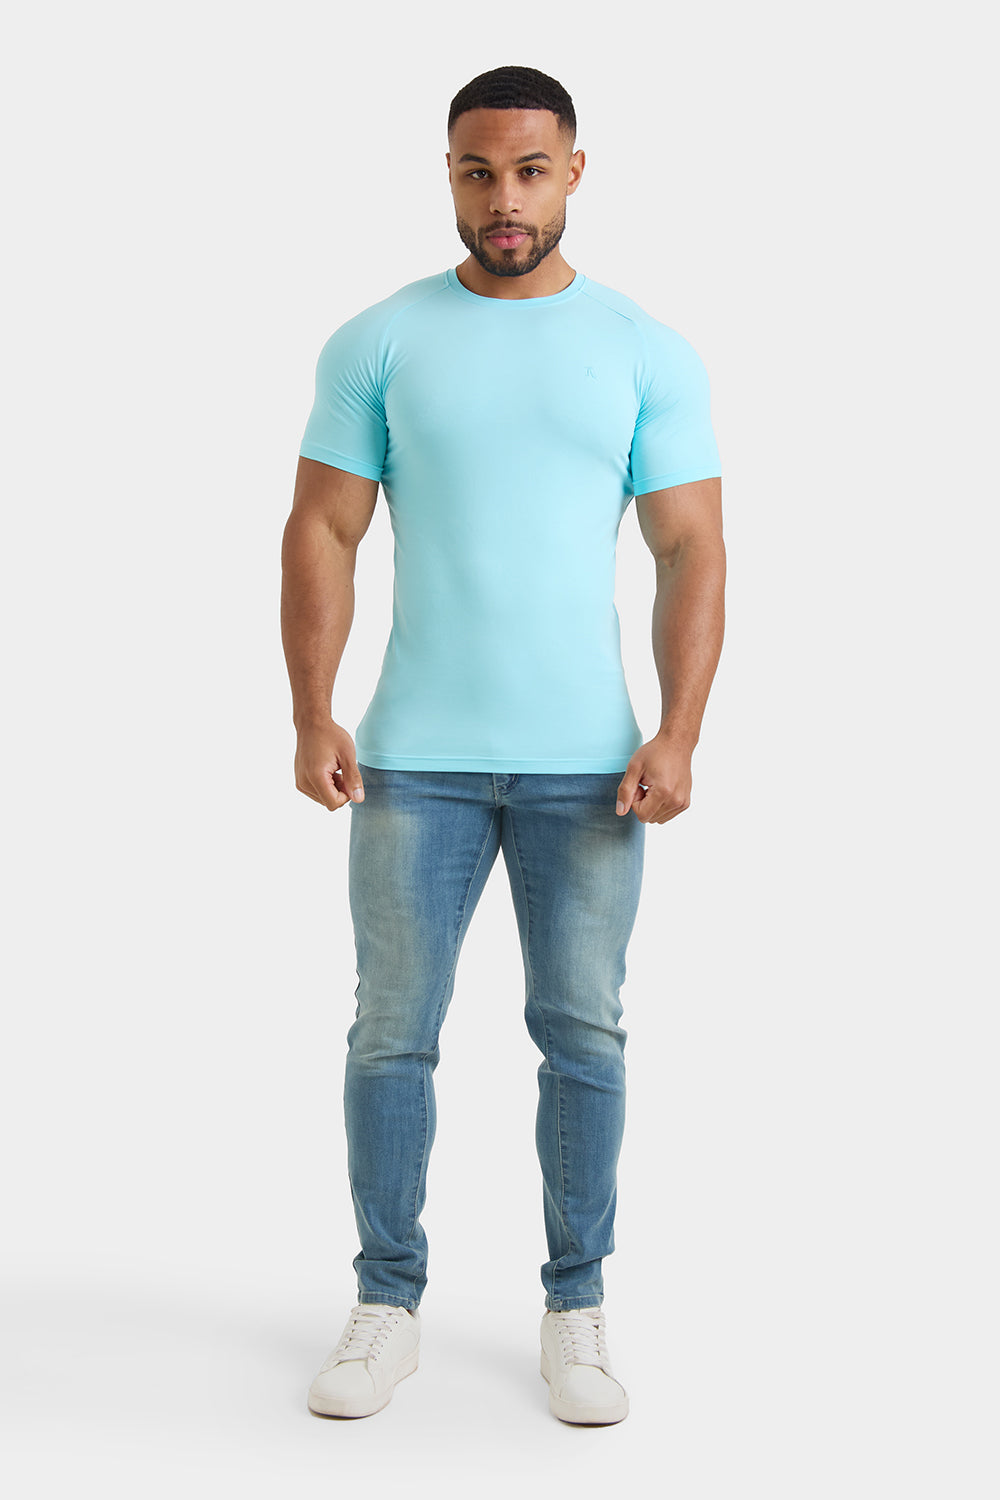 Premium Muscle Fit T-Shirt in Ocean Blue - TAILORED ATHLETE - ROW